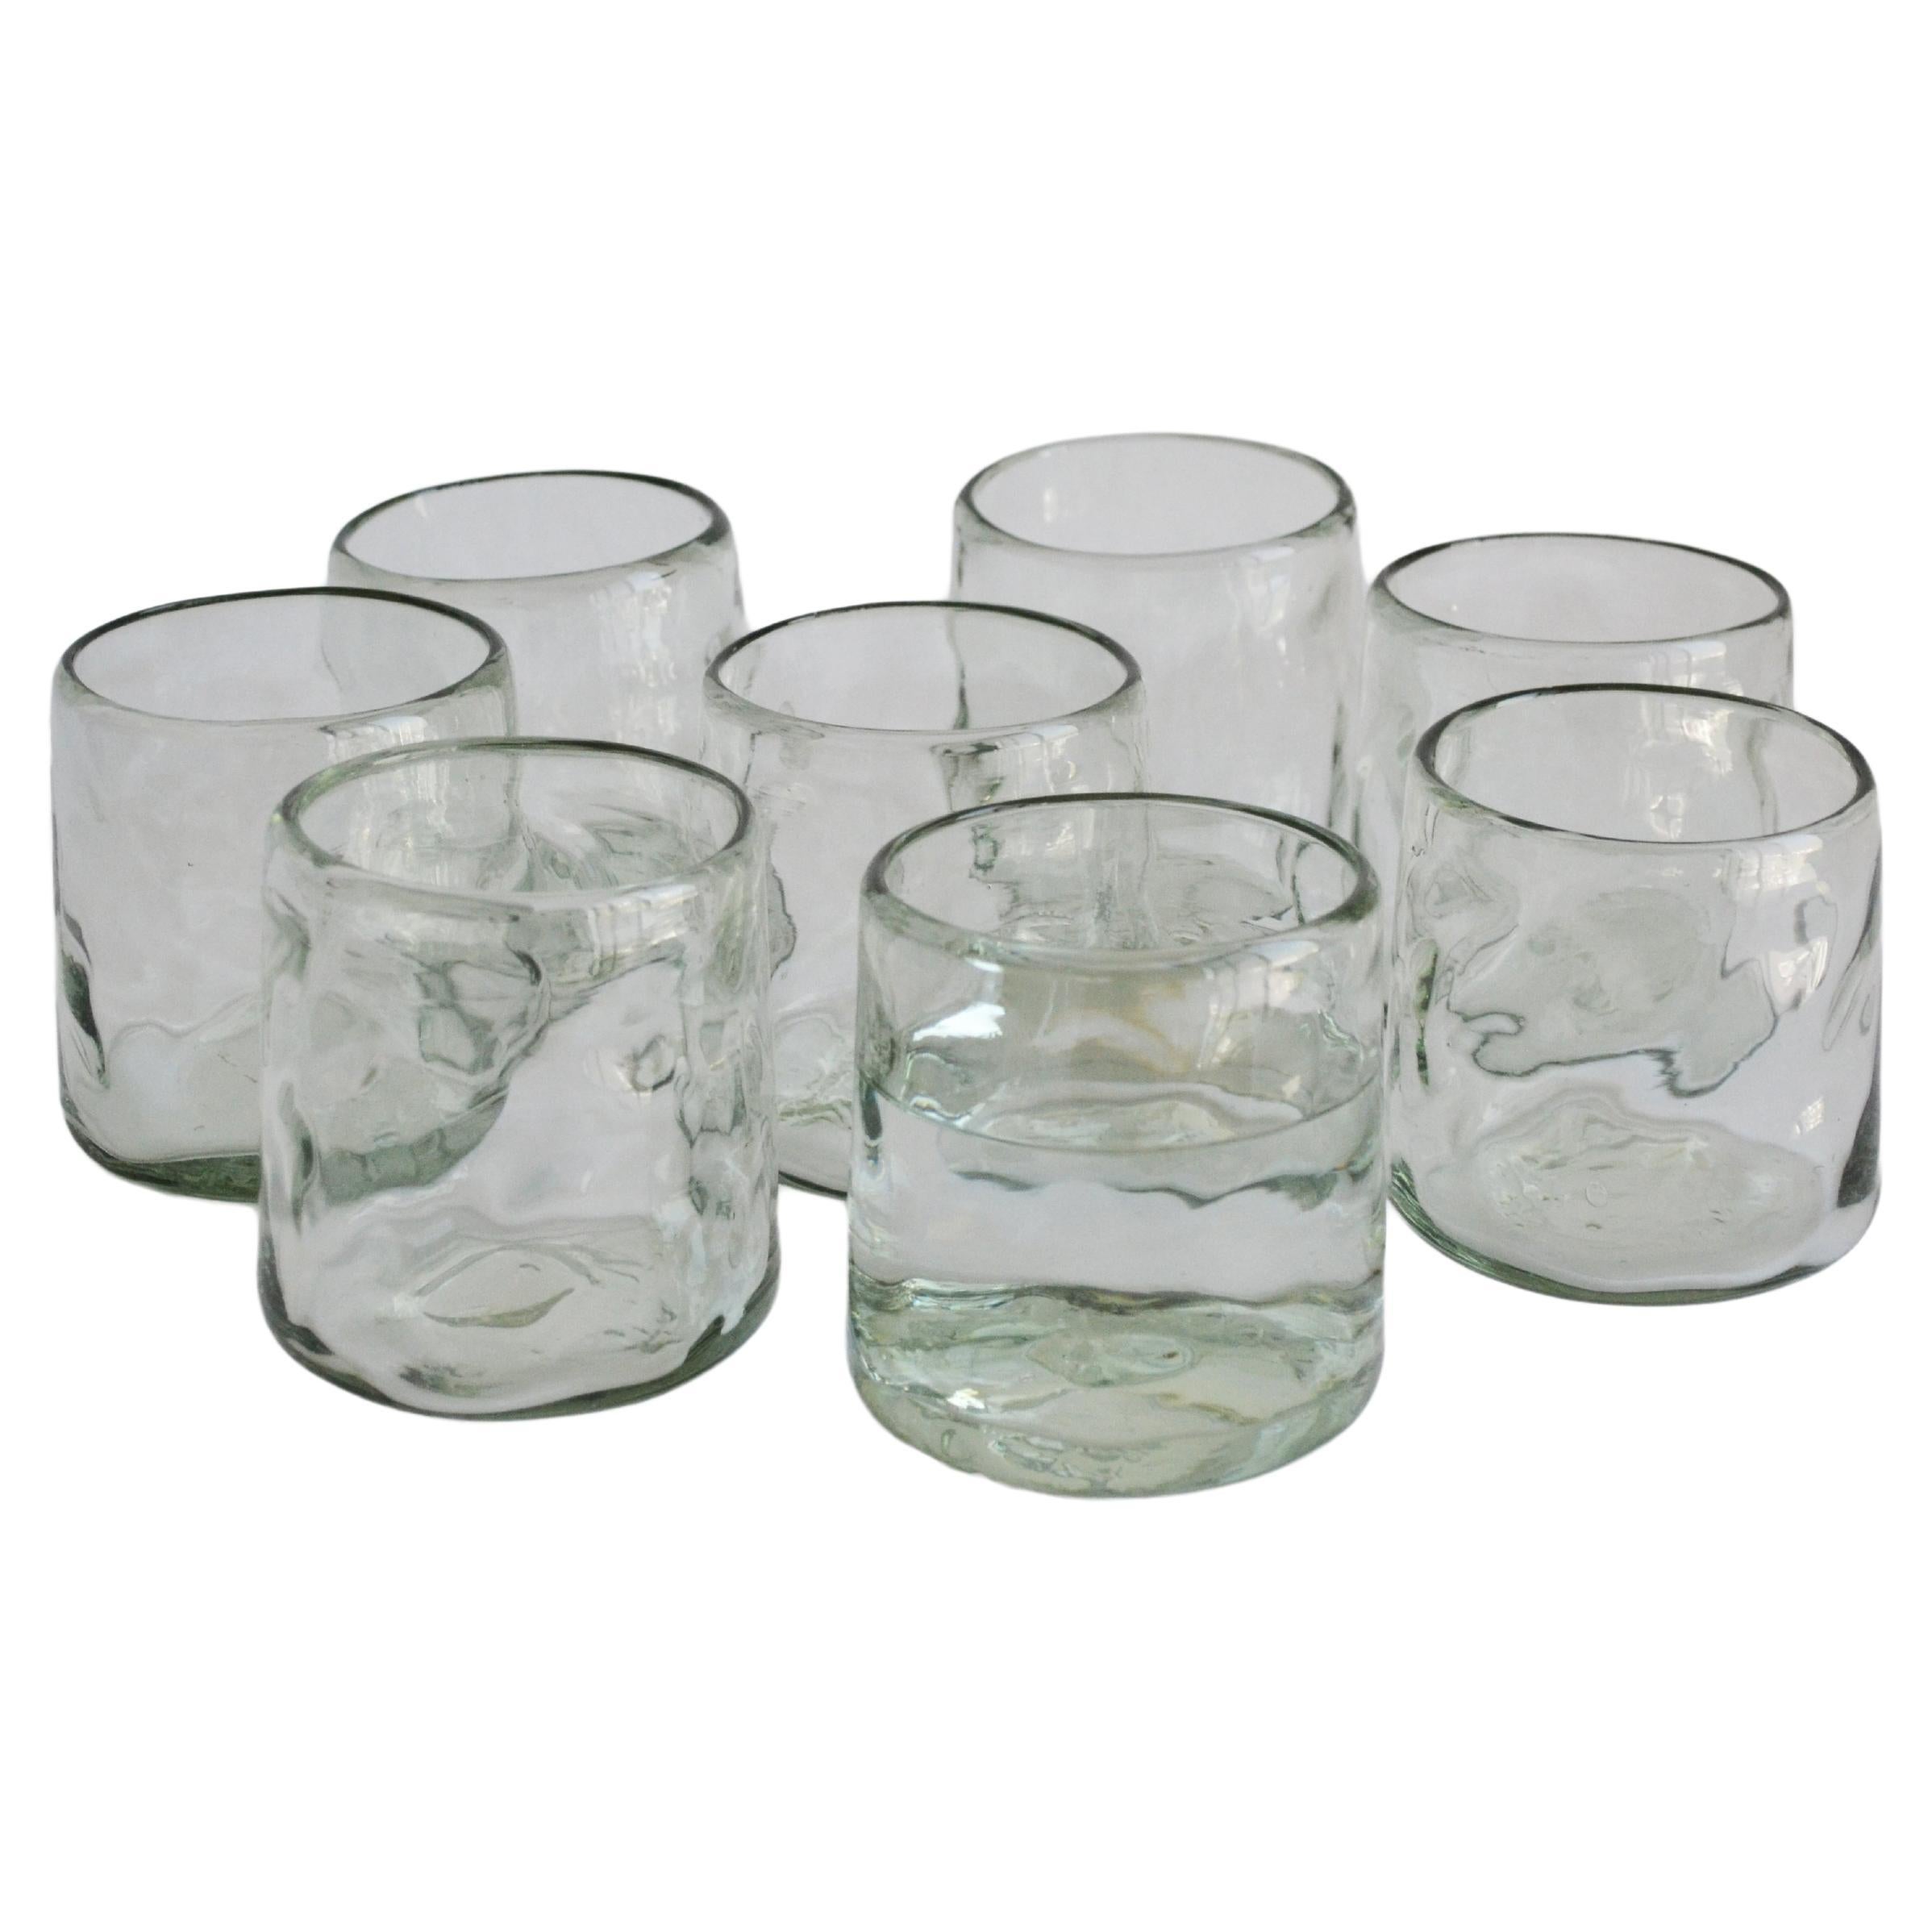 Six Water Glasses Handblown Recycled Glass Drinkware Mexico - Tall